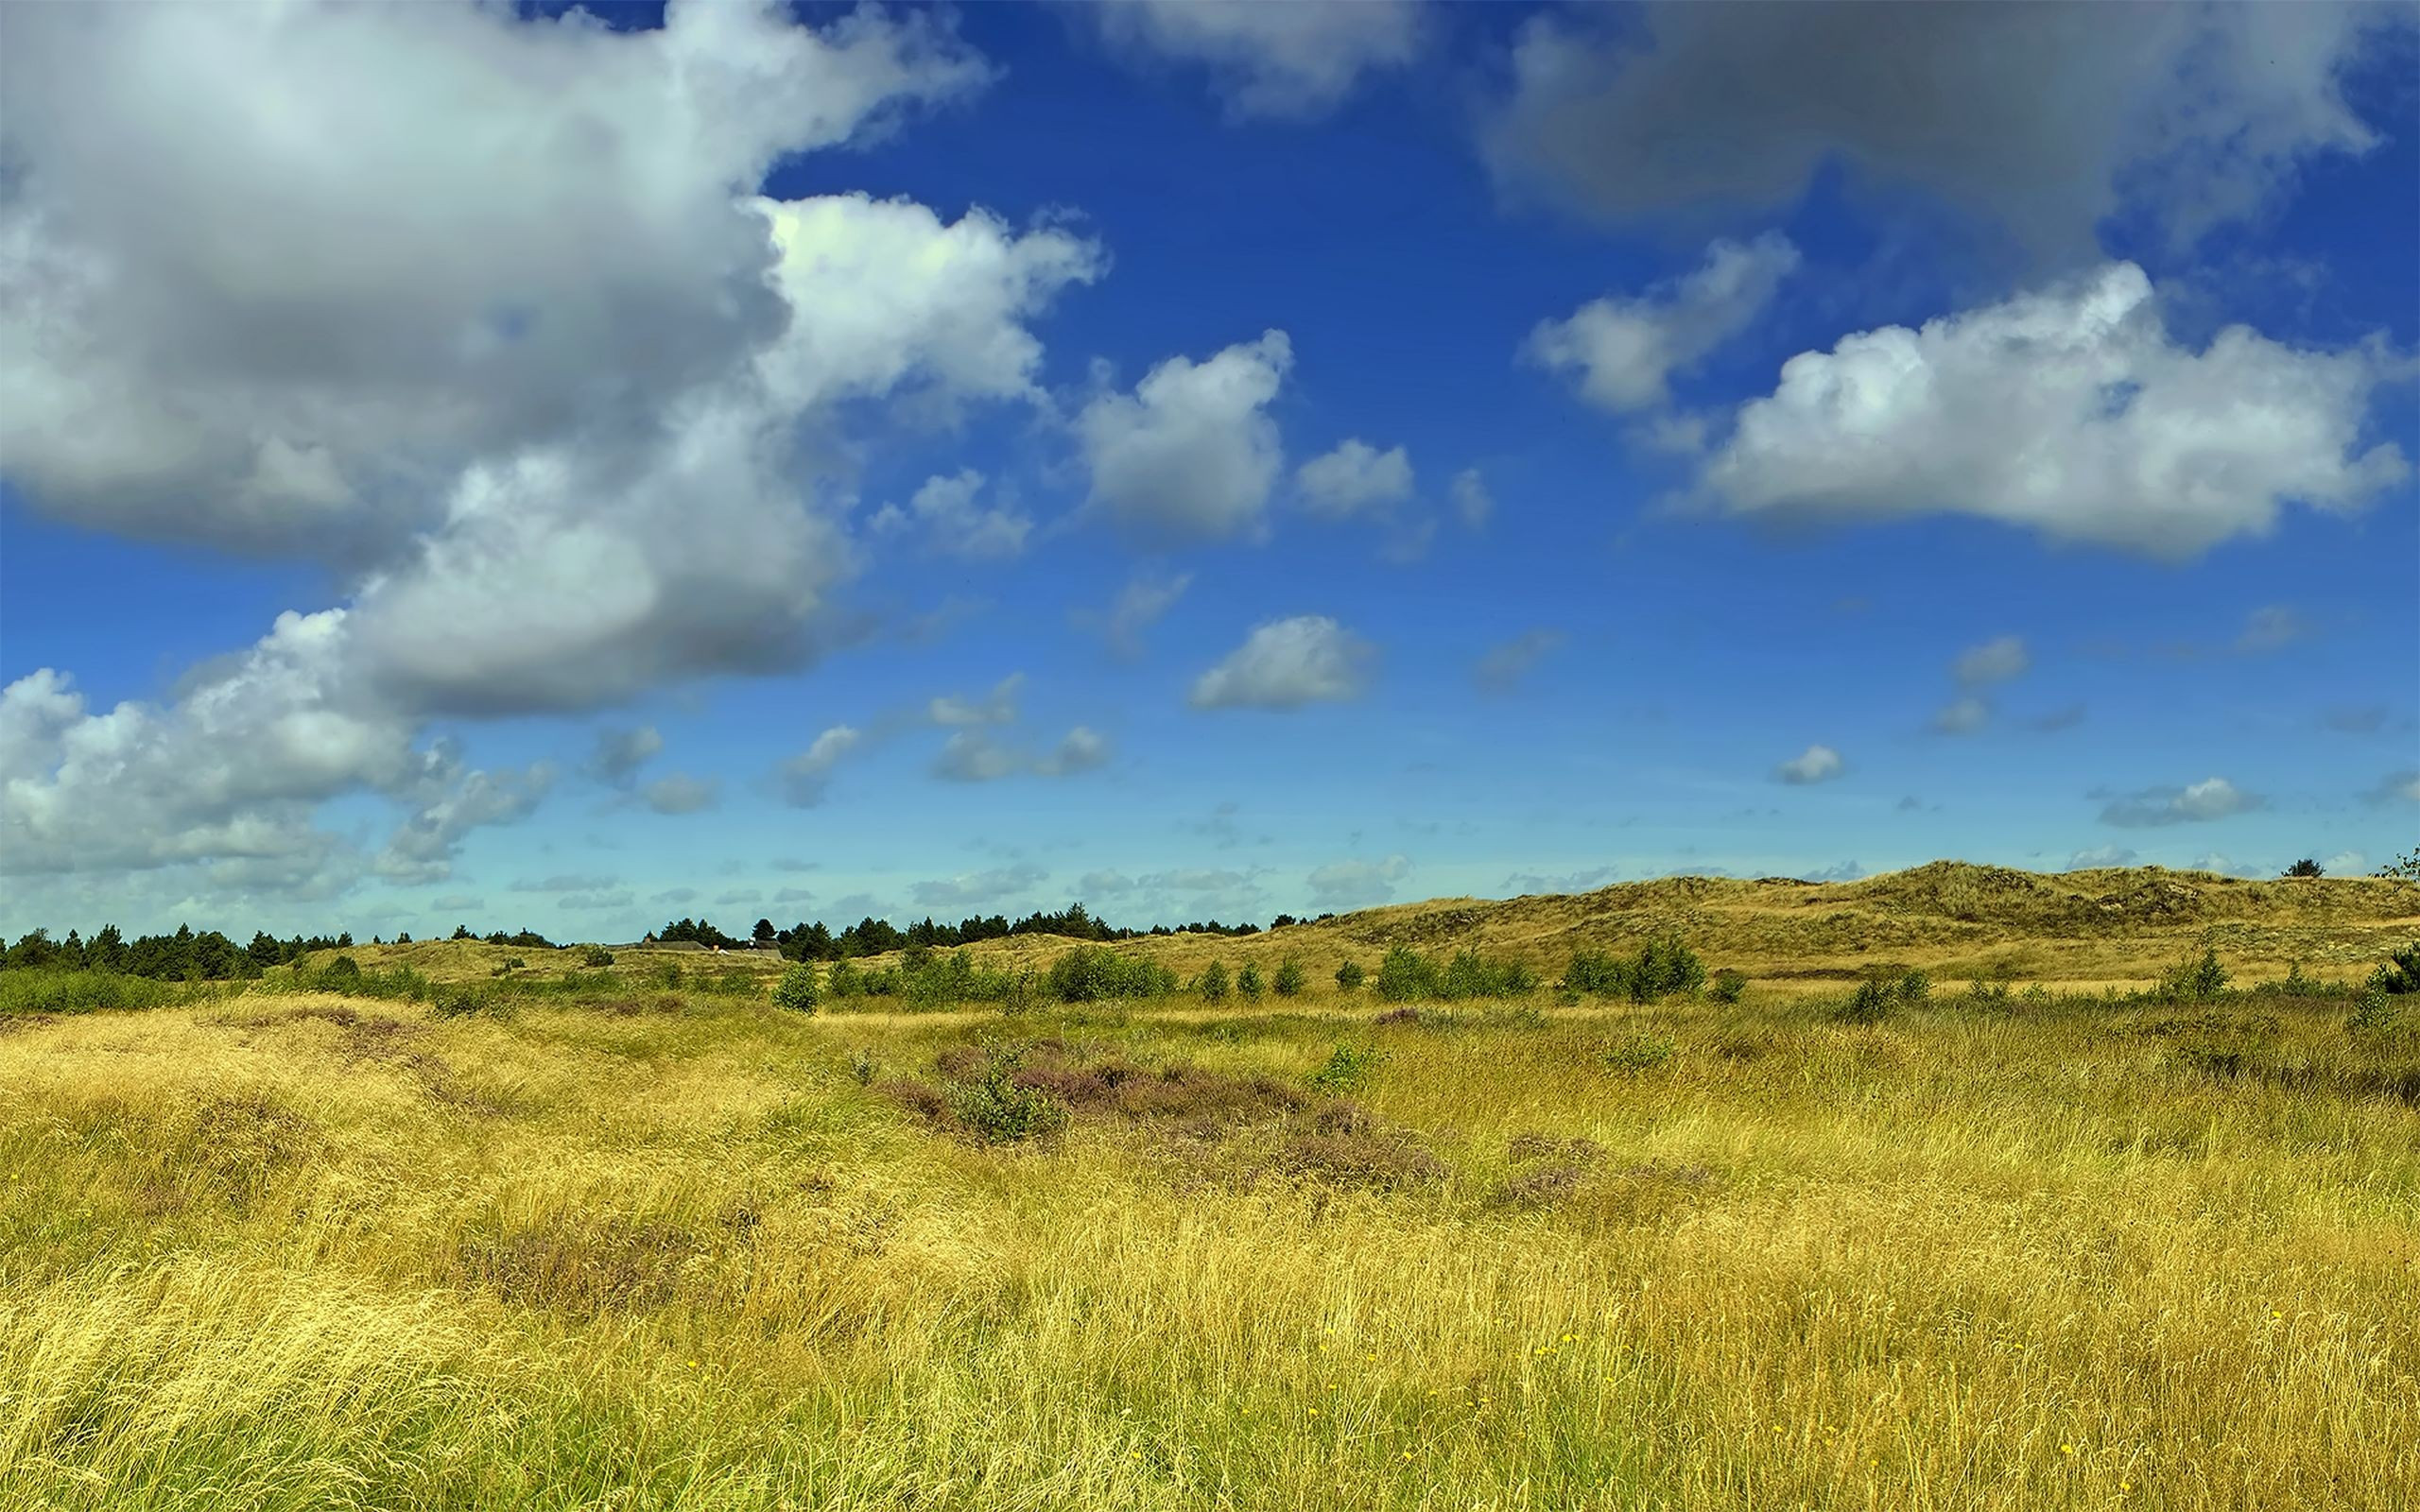 2560x1600 4k Relaxing field and fluffy clouds Wallpaper for desktop and mobile phones.